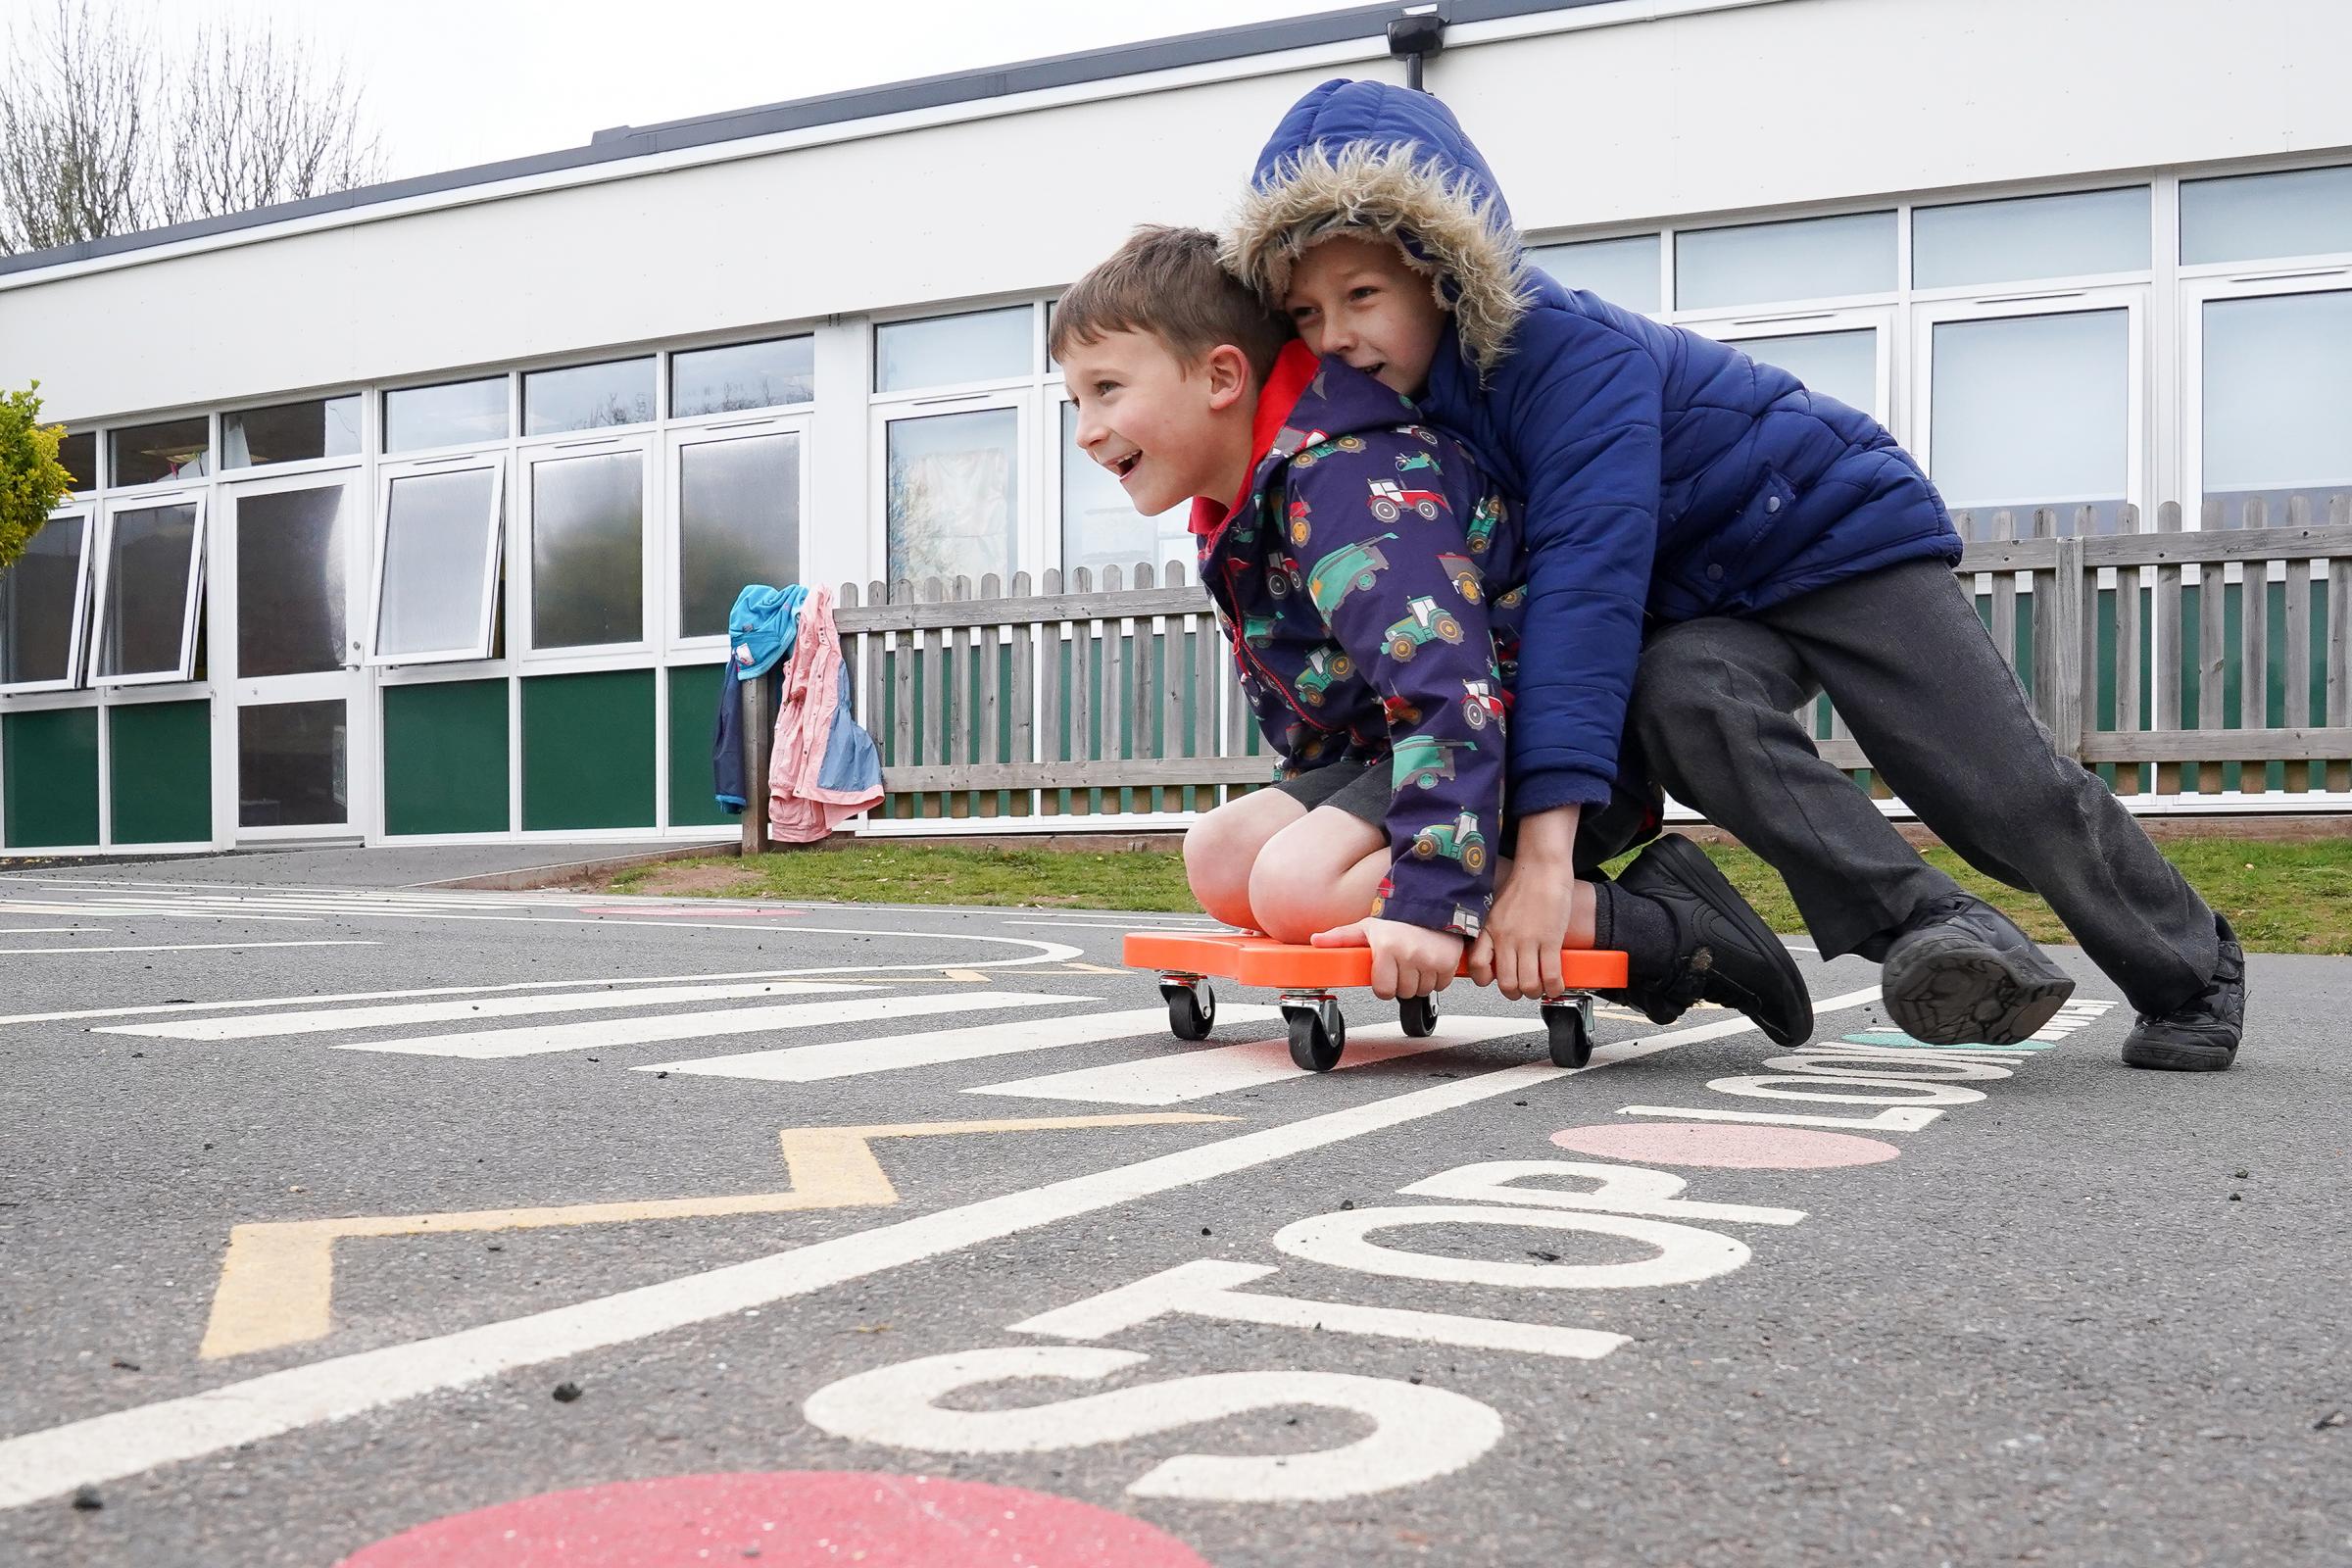 Year 2 pupils enjoy learning road safety at Much Birch Primary School.